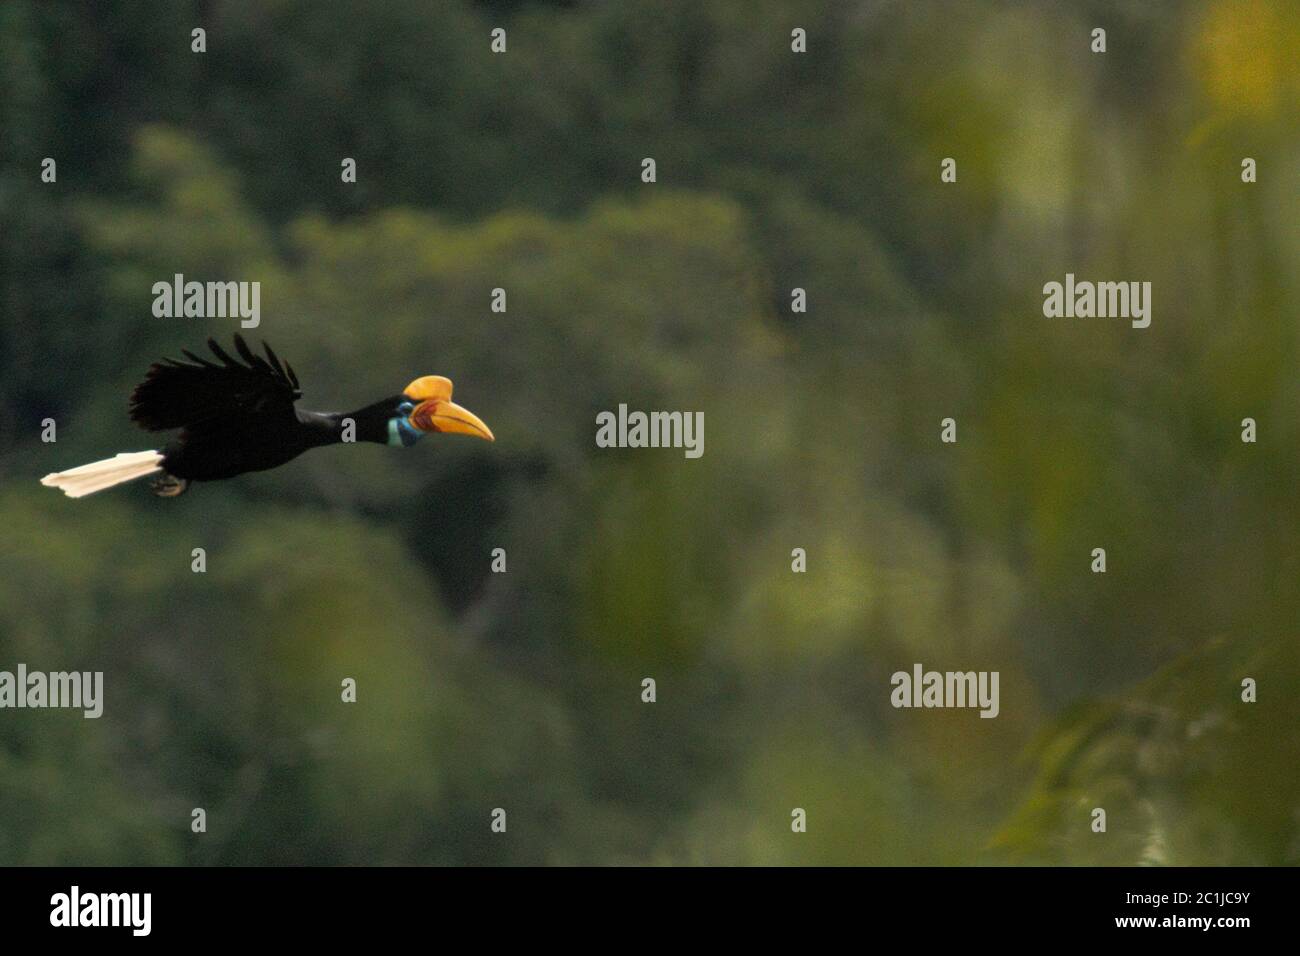 A female Sulawesi wrinkled hornbill (Rhyticeros cassidix) flying over tropical rainforest canopy in North Sulawesi, Indonesia. Stock Photo